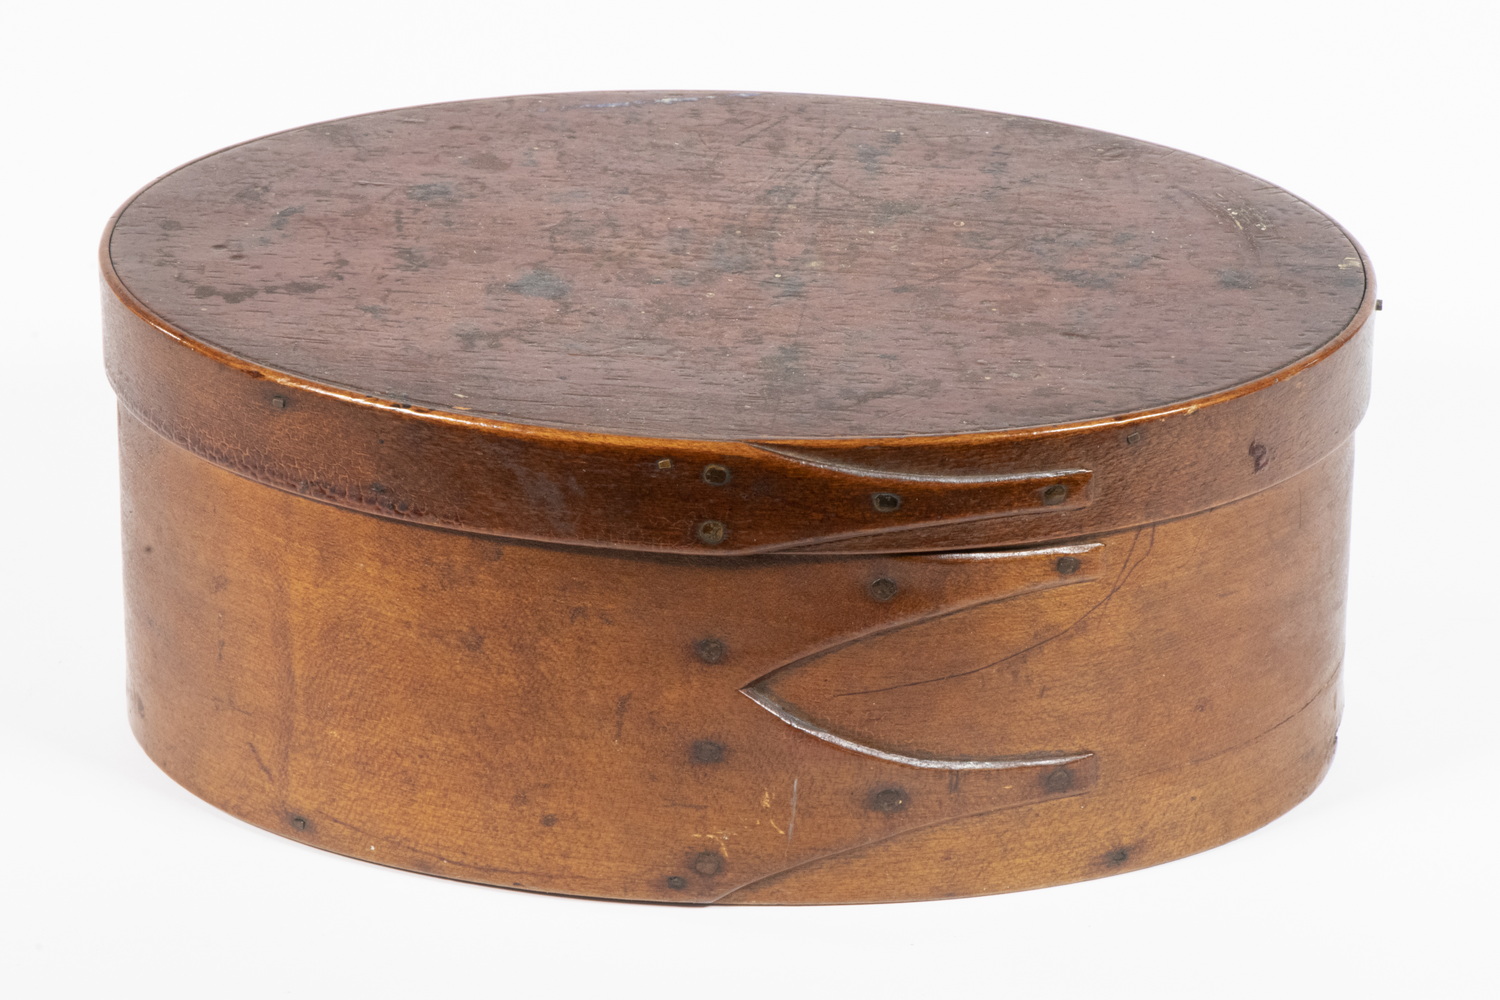 SHAKER OVAL WOODEN PANTRY BOX 19th